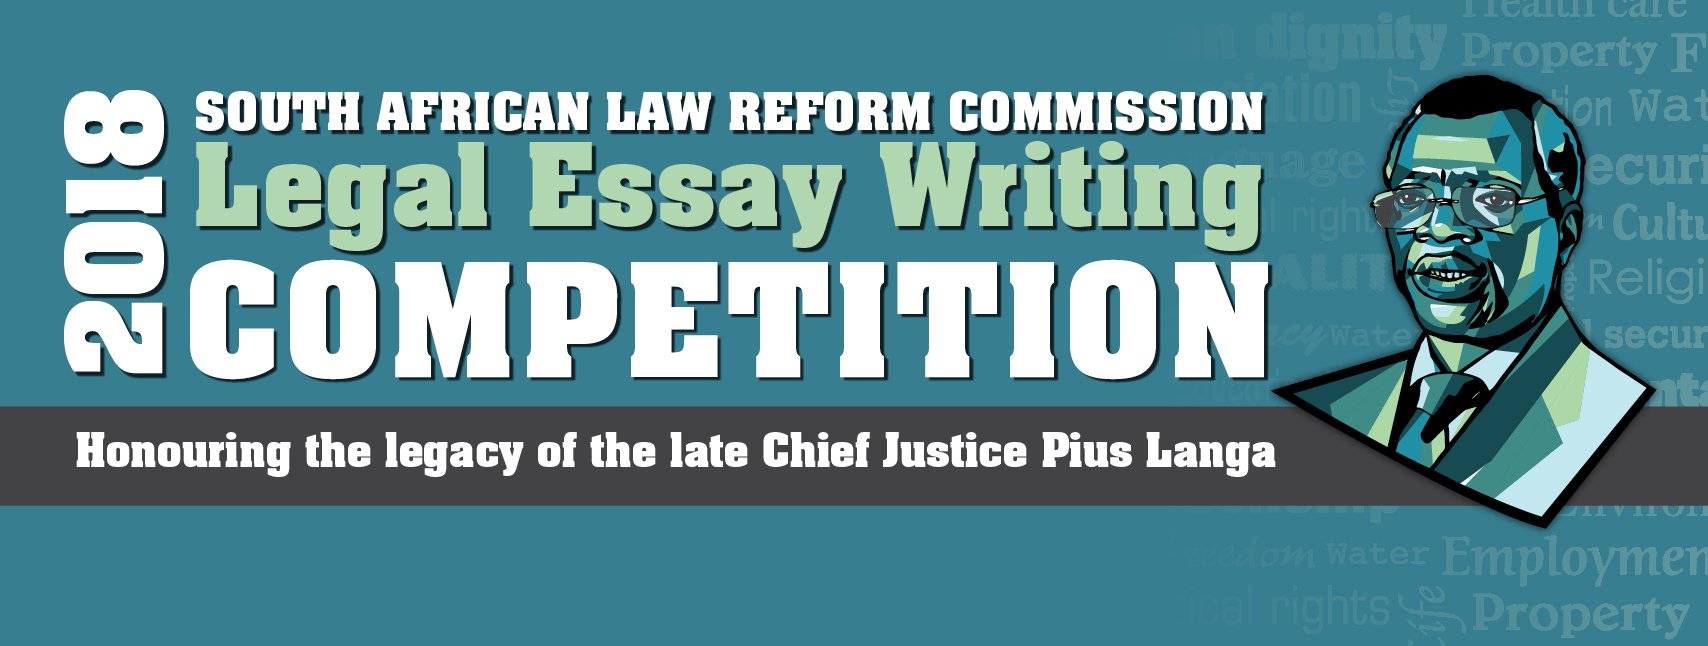 south african law reform commission essay competition